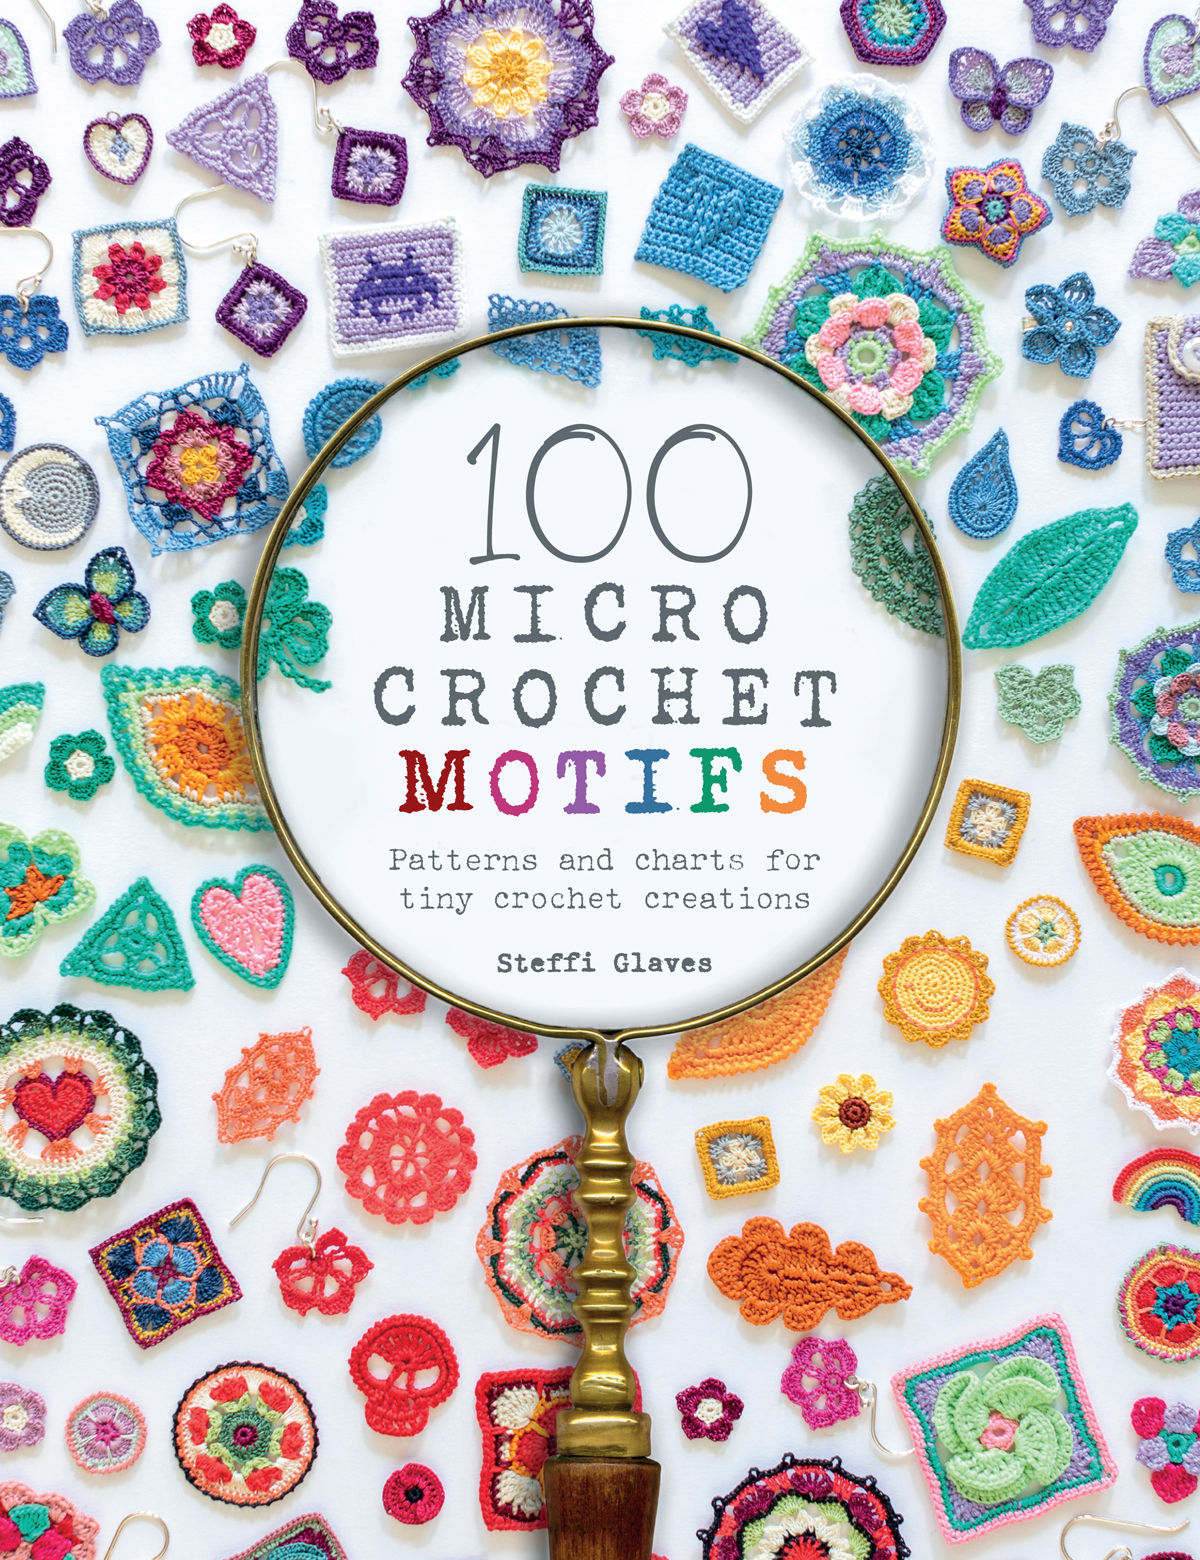 100 MICRO CROCHET MOTIFS Patterns and charts for tiny crochet creations - photo 1